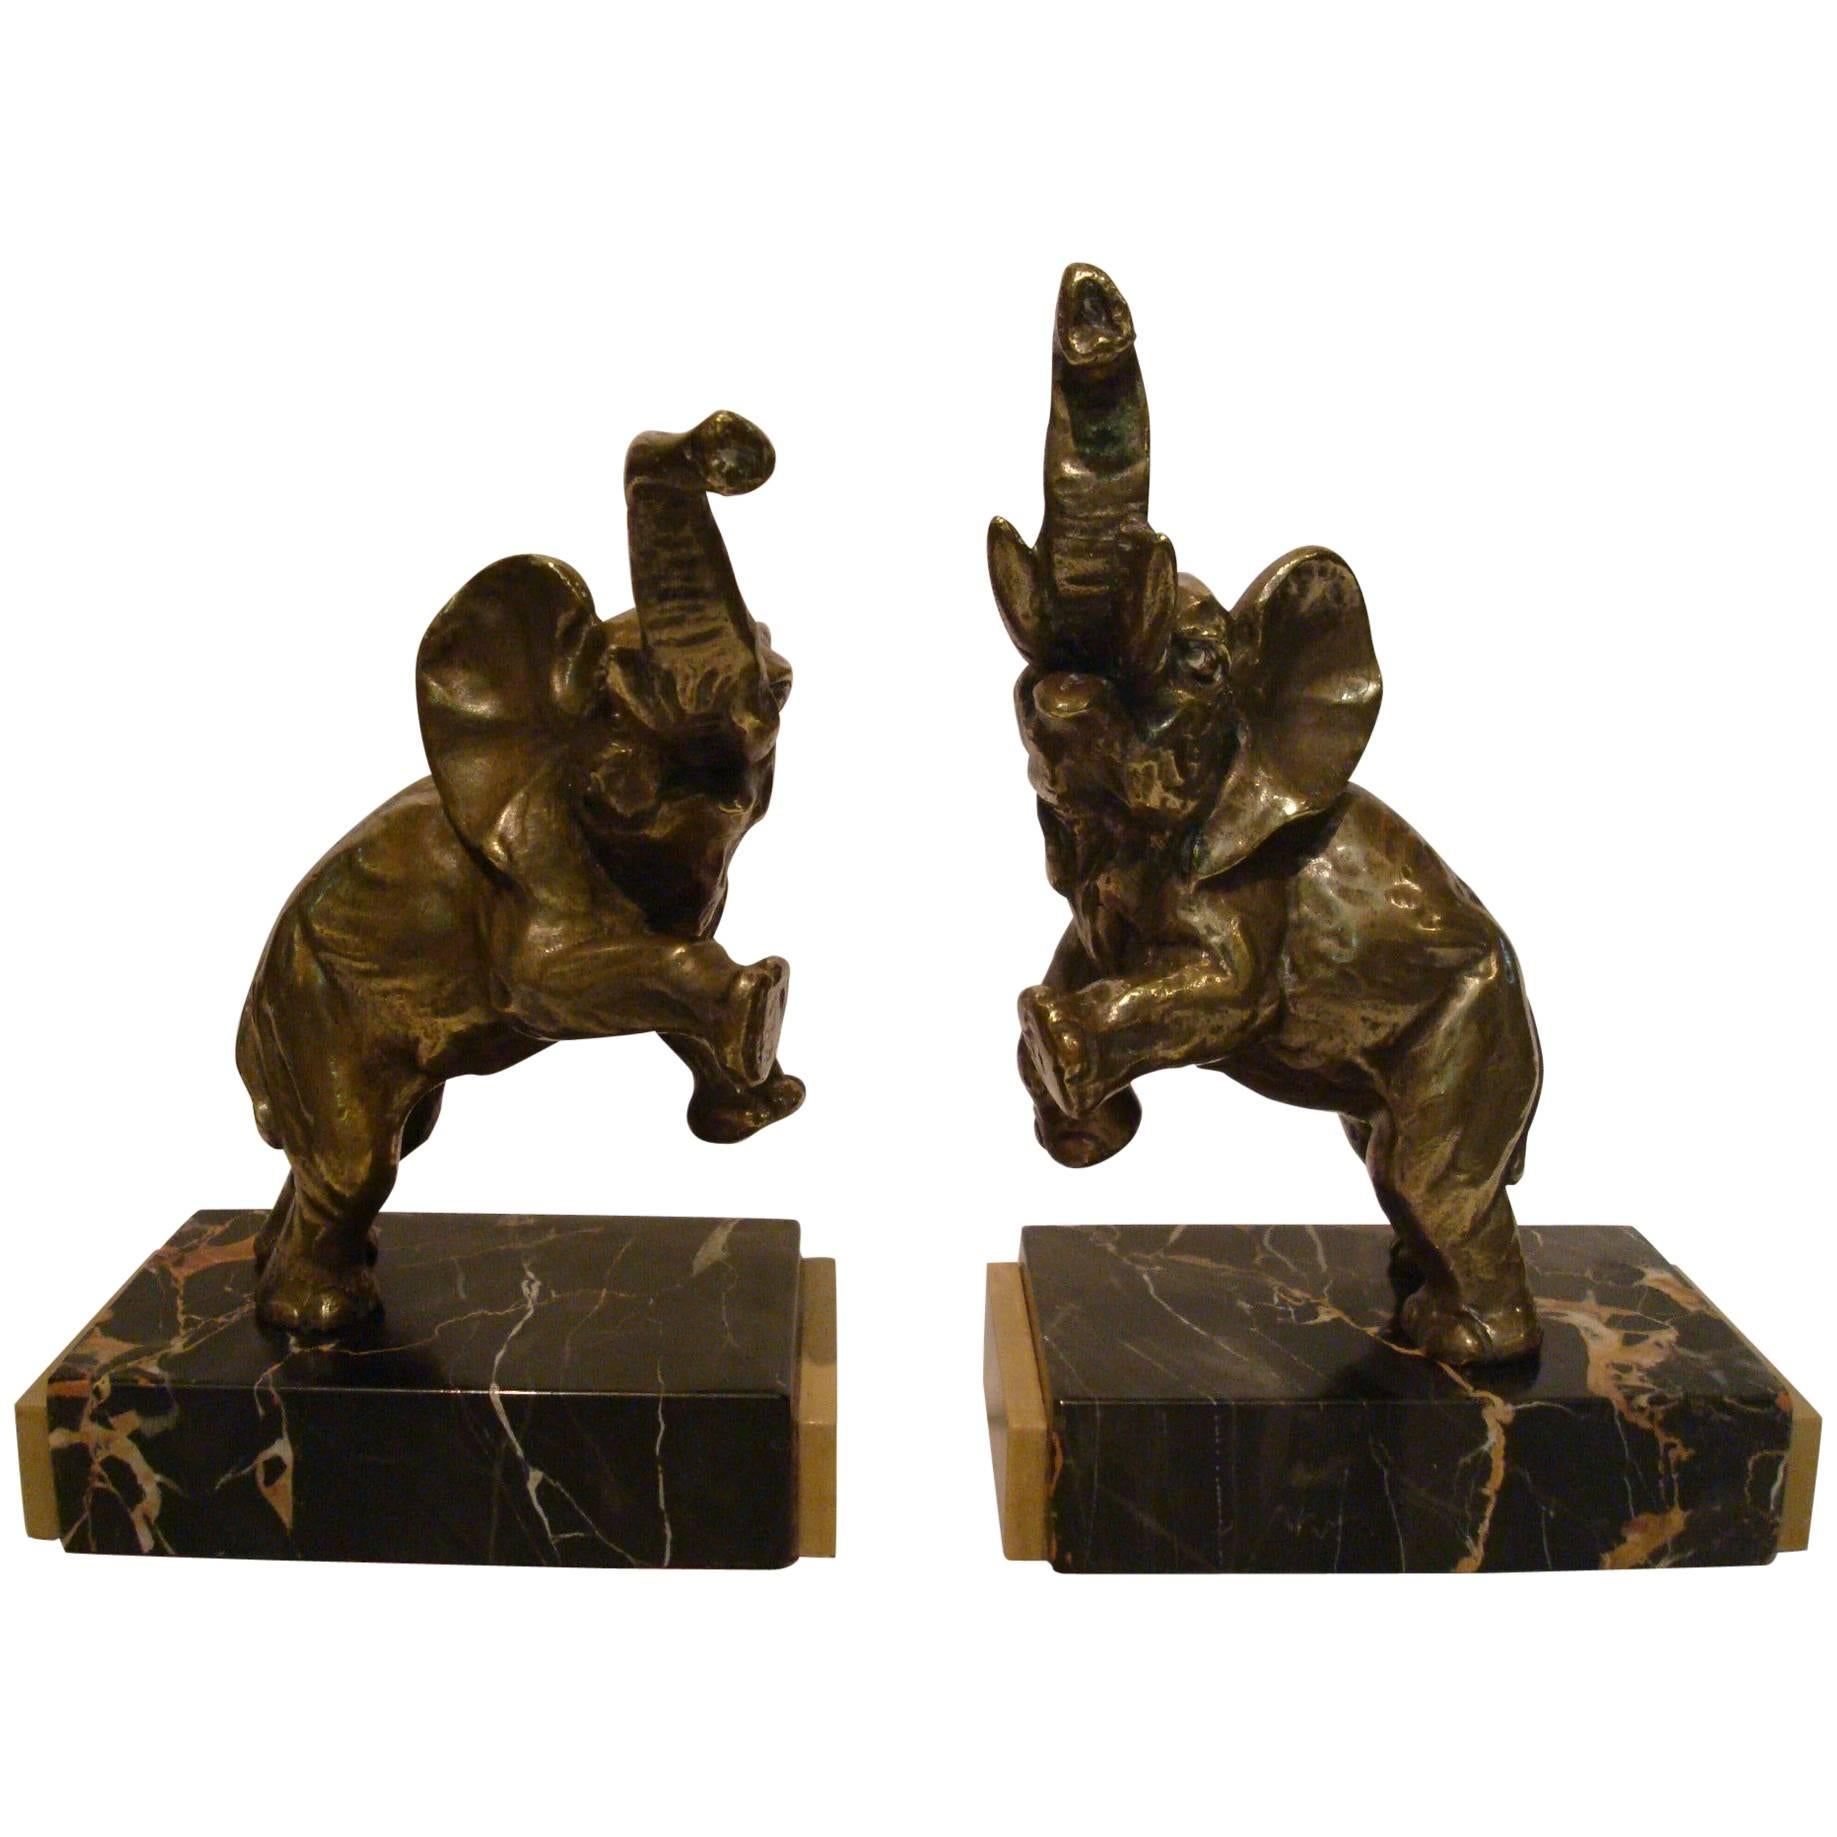 Art Deco Pair of Elephant Bookends, L. Fontinelle, France, 1930